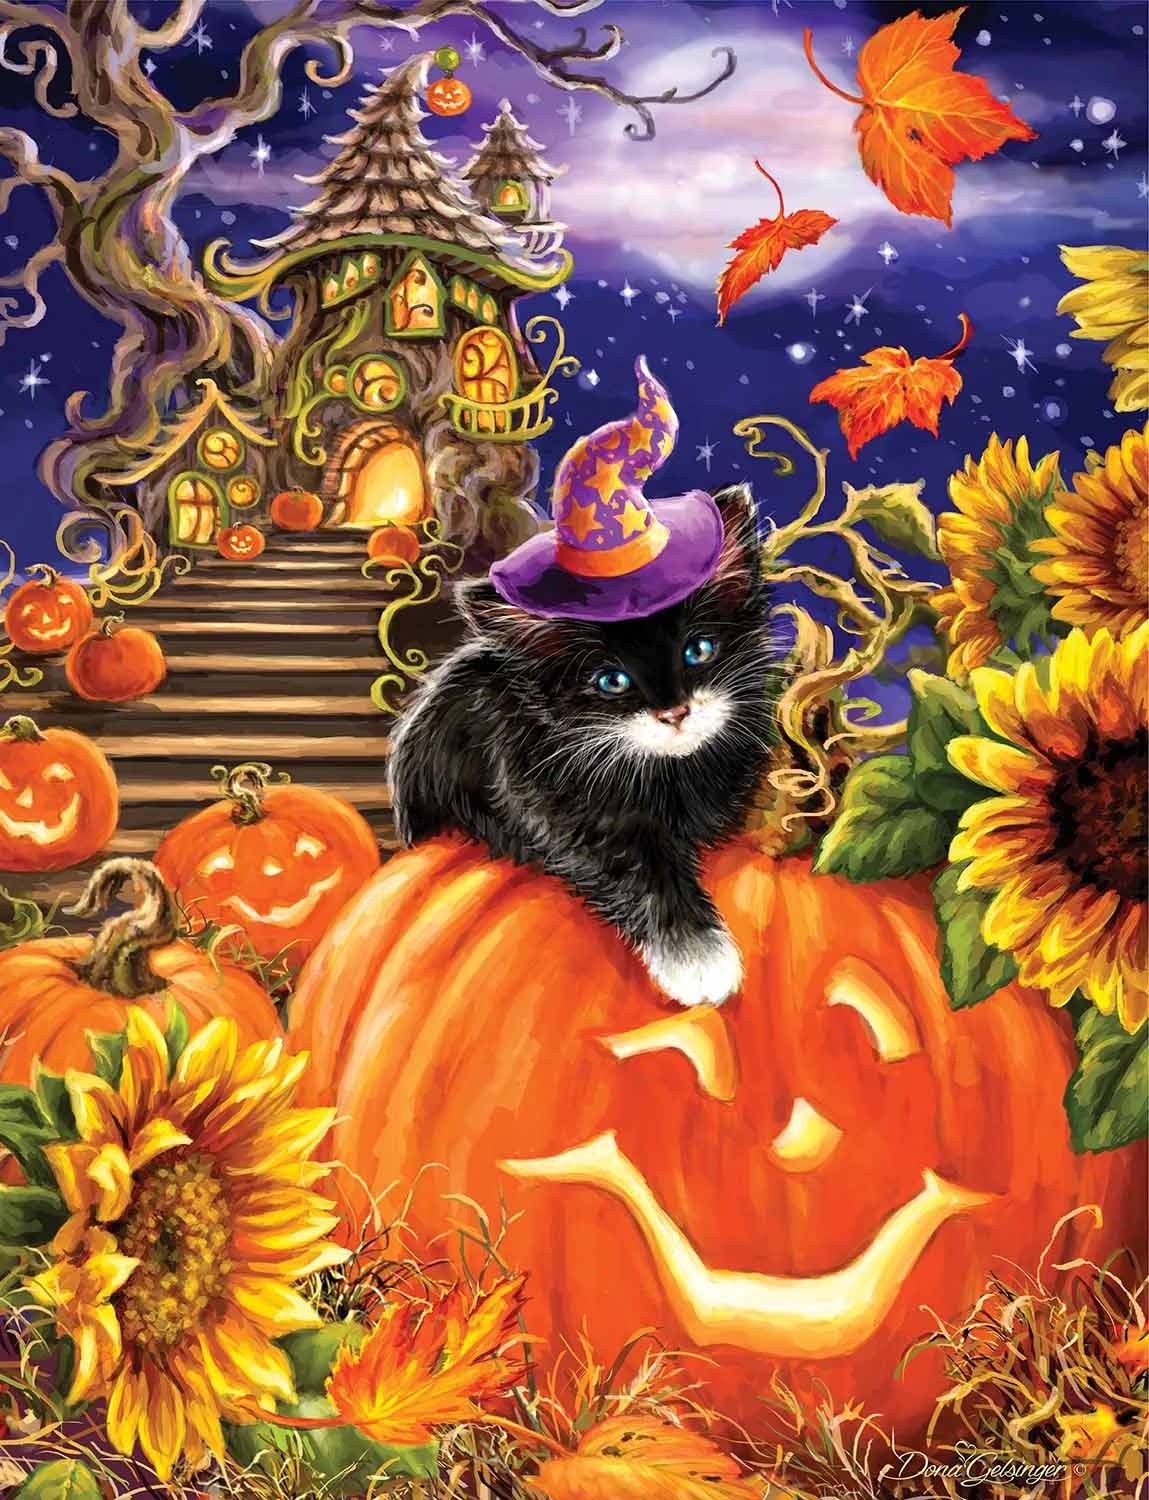 Spellbound Night Cats Jigsaw Puzzle